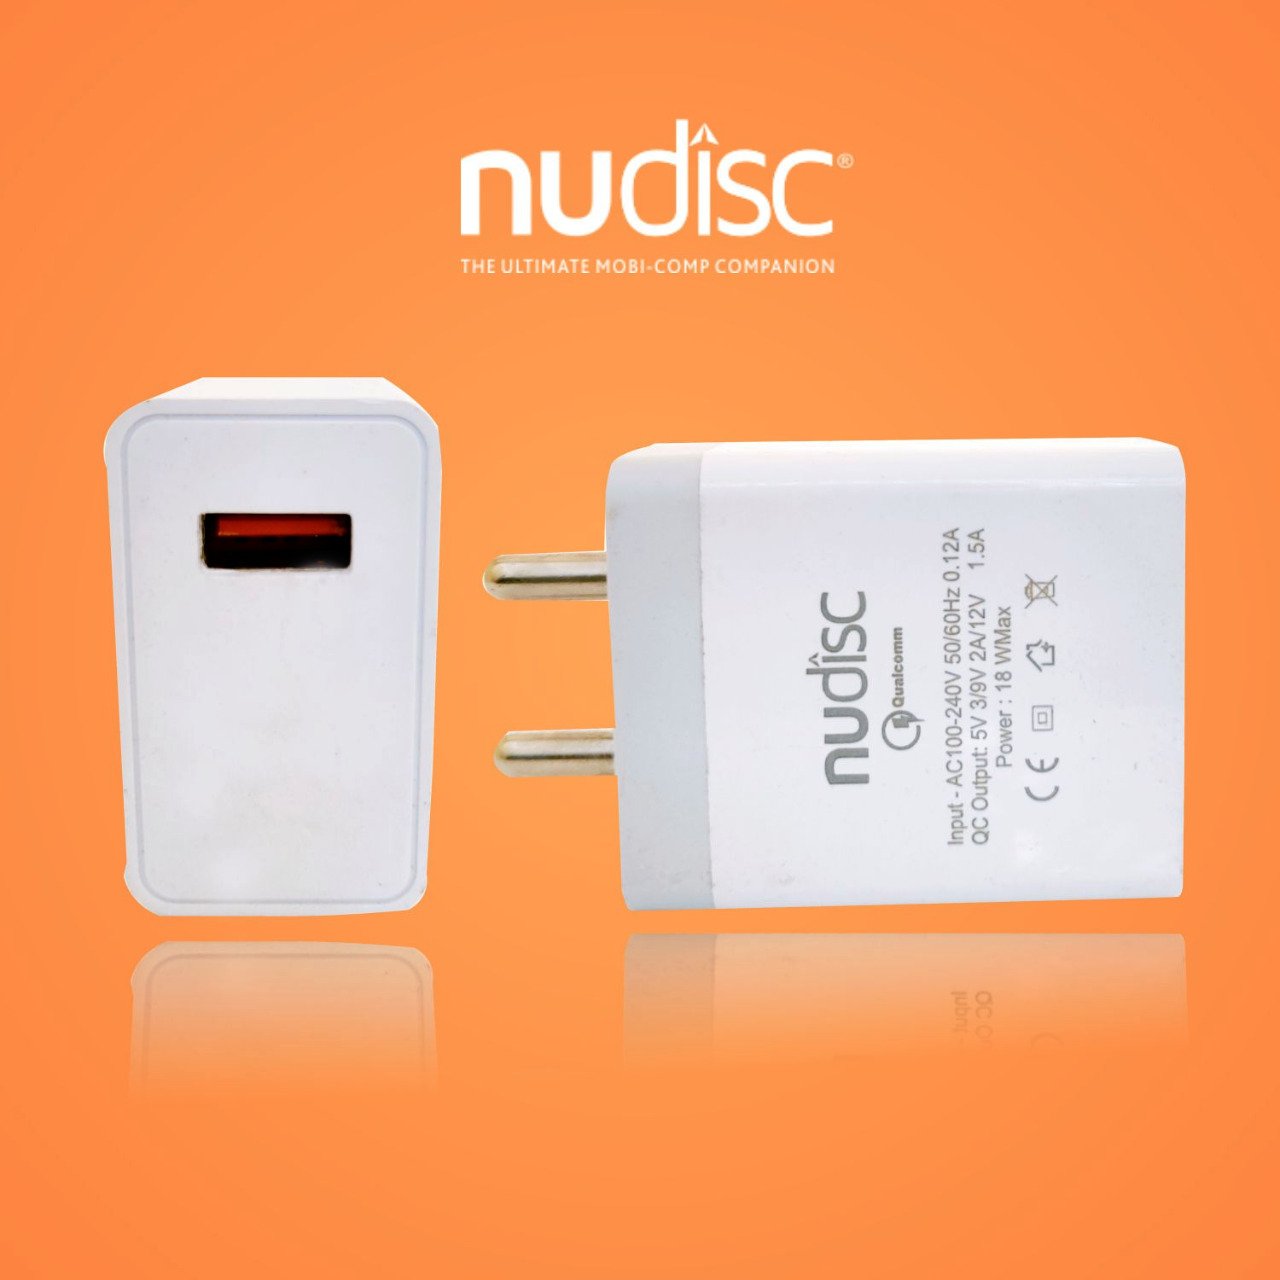 Nudisc CR30 mobile charger